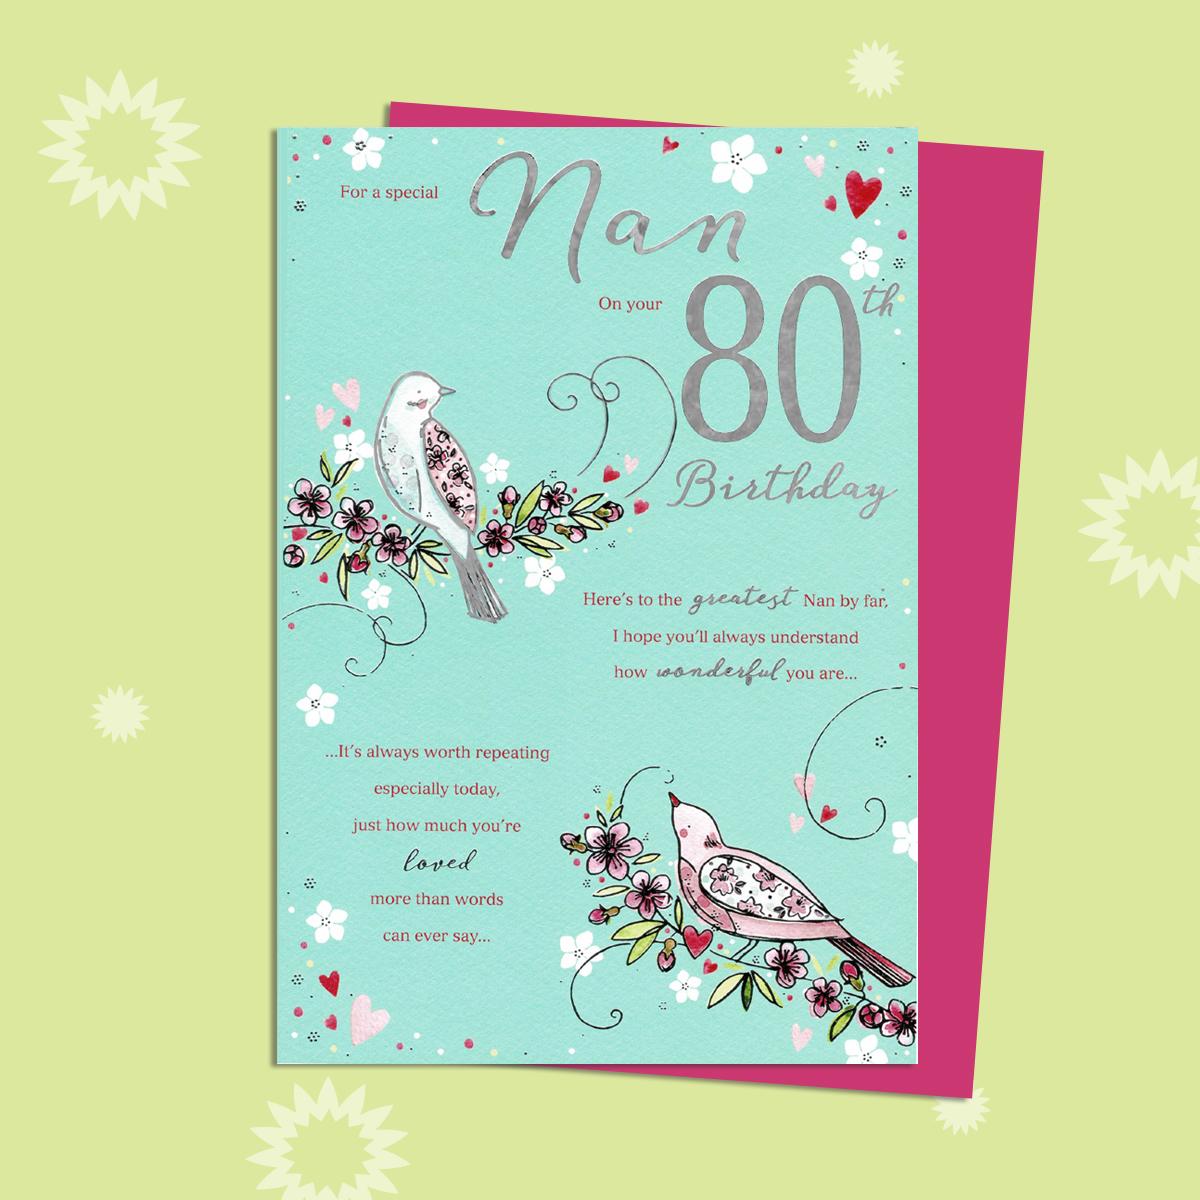 Nan On Your 80th Birthday Card Alongside Its Magenta Envelope